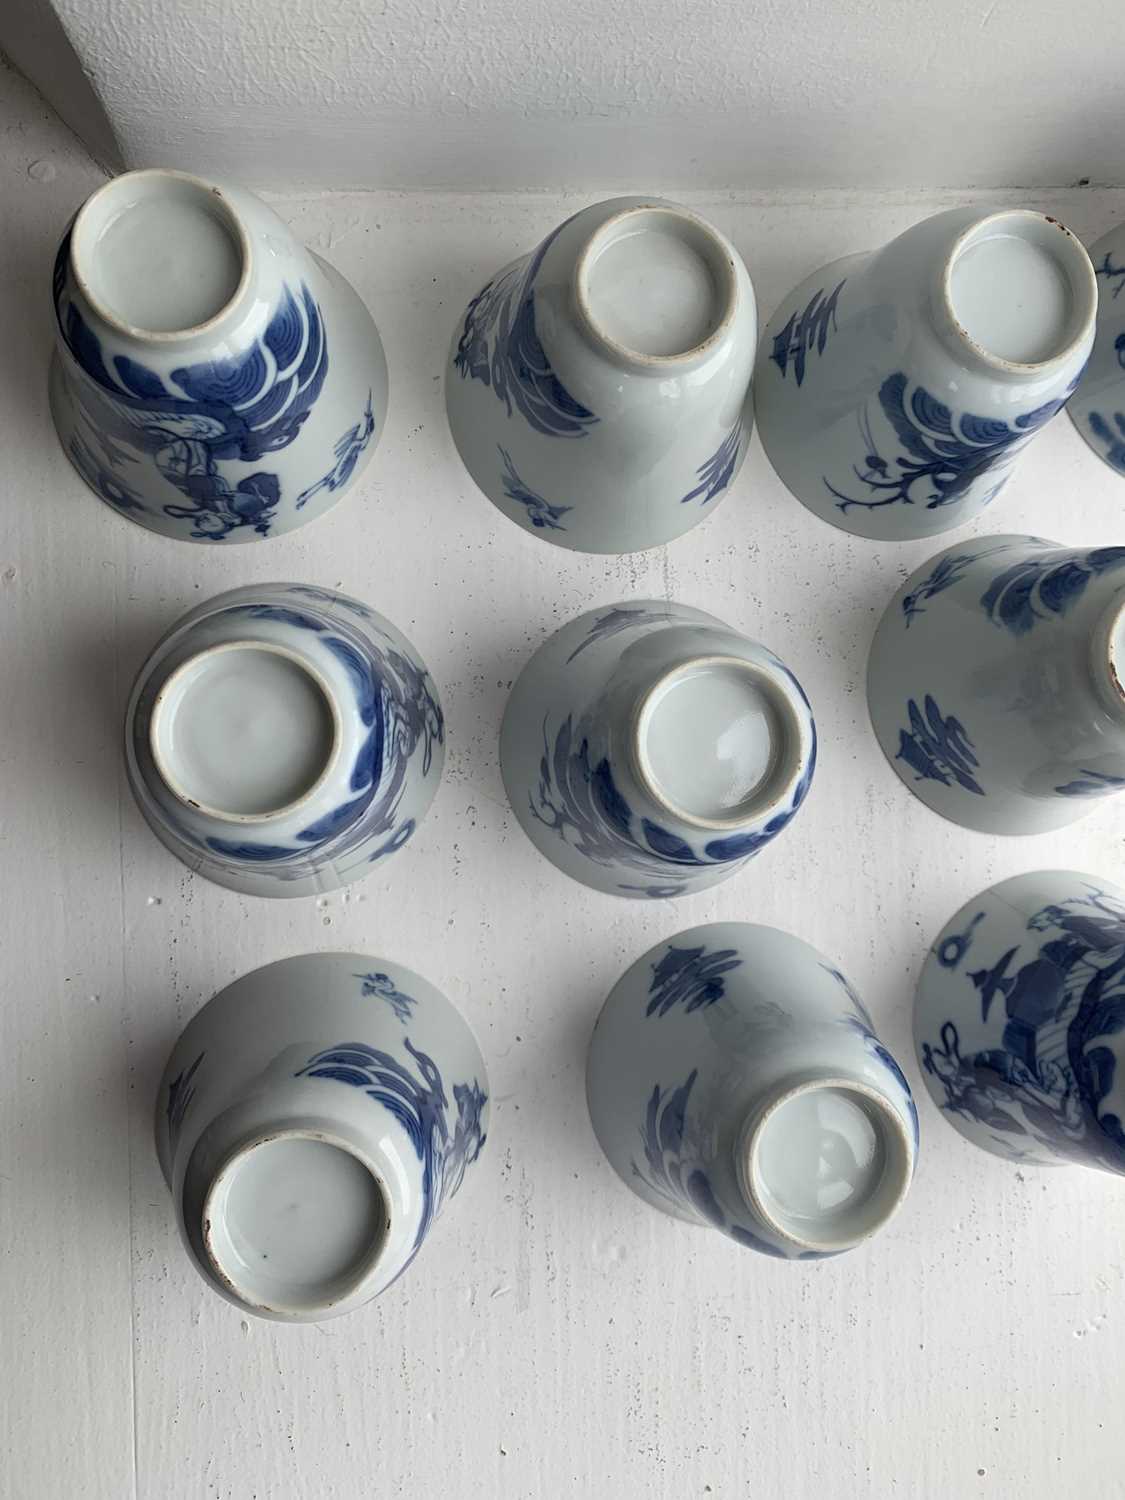 A set of Chinese blue and white porcelain cups, covers and stands, 18th century. - Image 30 of 41